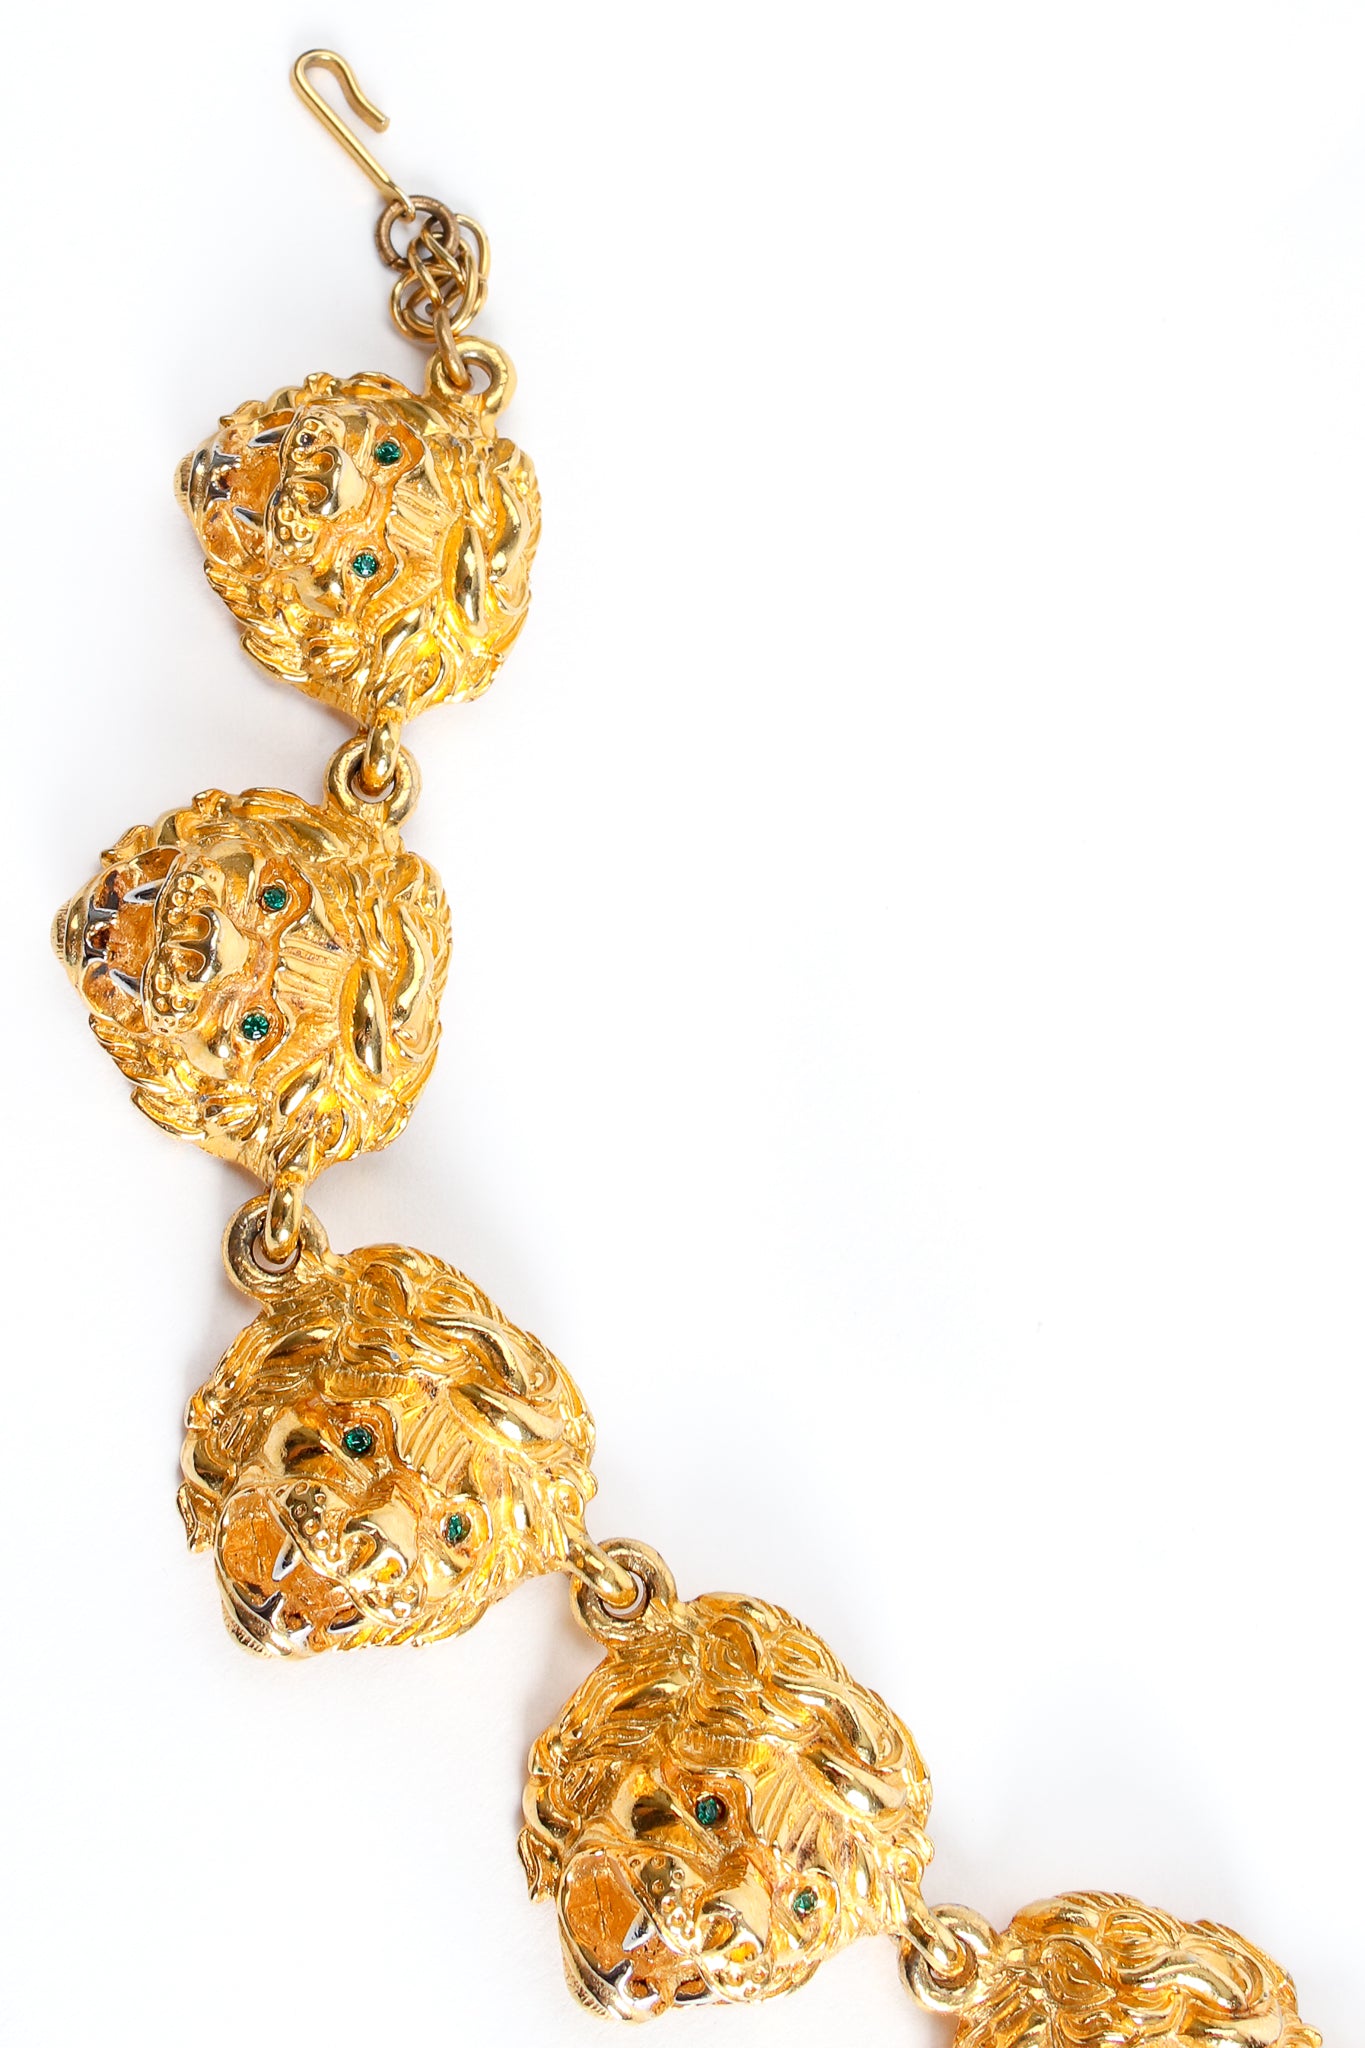 Vintage Judith Leiber Majestic Leo Collar Necklace Set detail at Recess Los Angeles